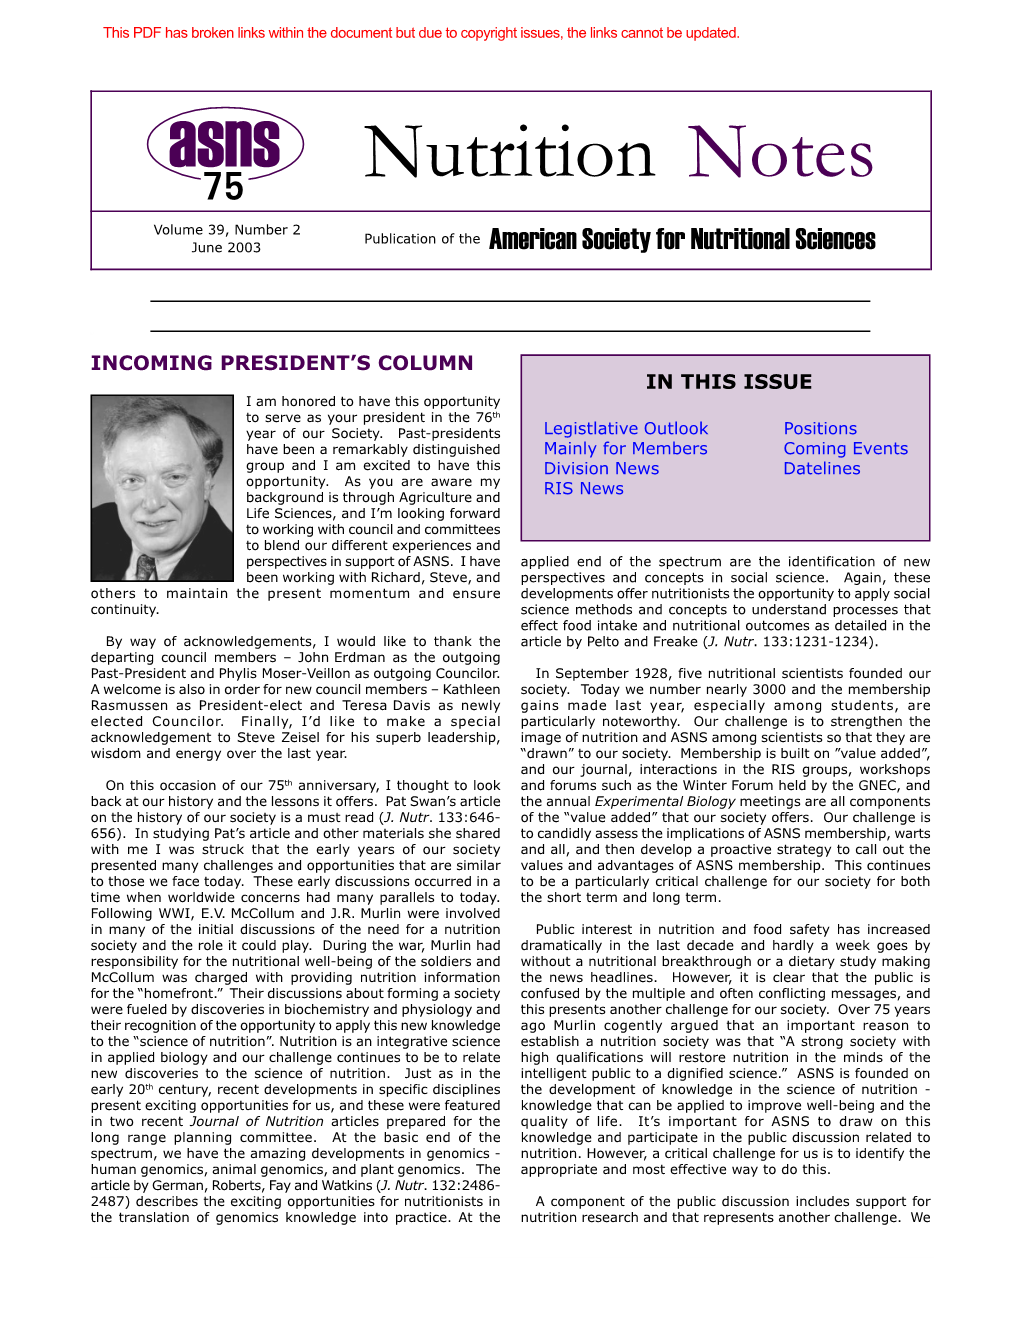 Notes Nutrition Asns